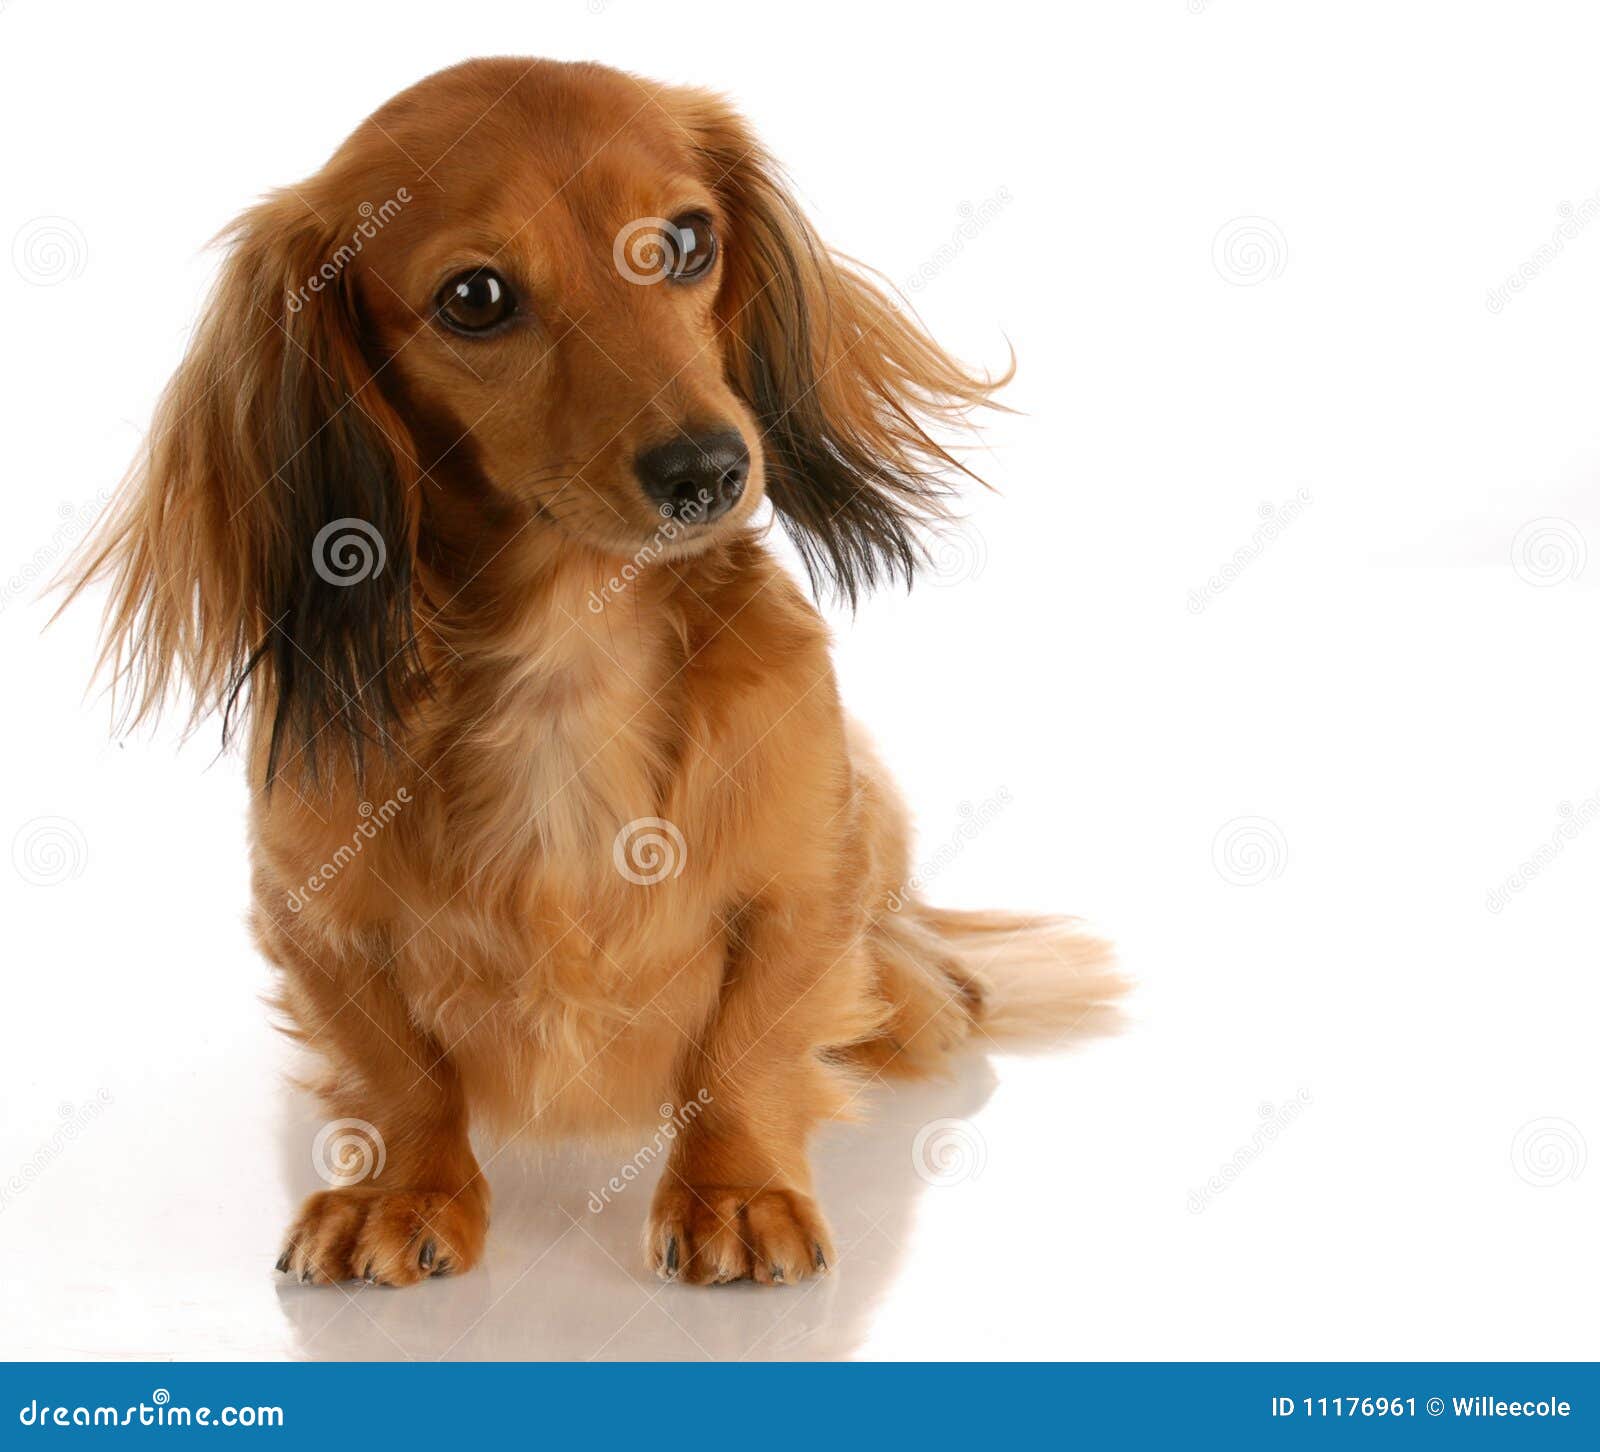 Long Haired Miniature Dachshund Stock Image Image Of Hair Close